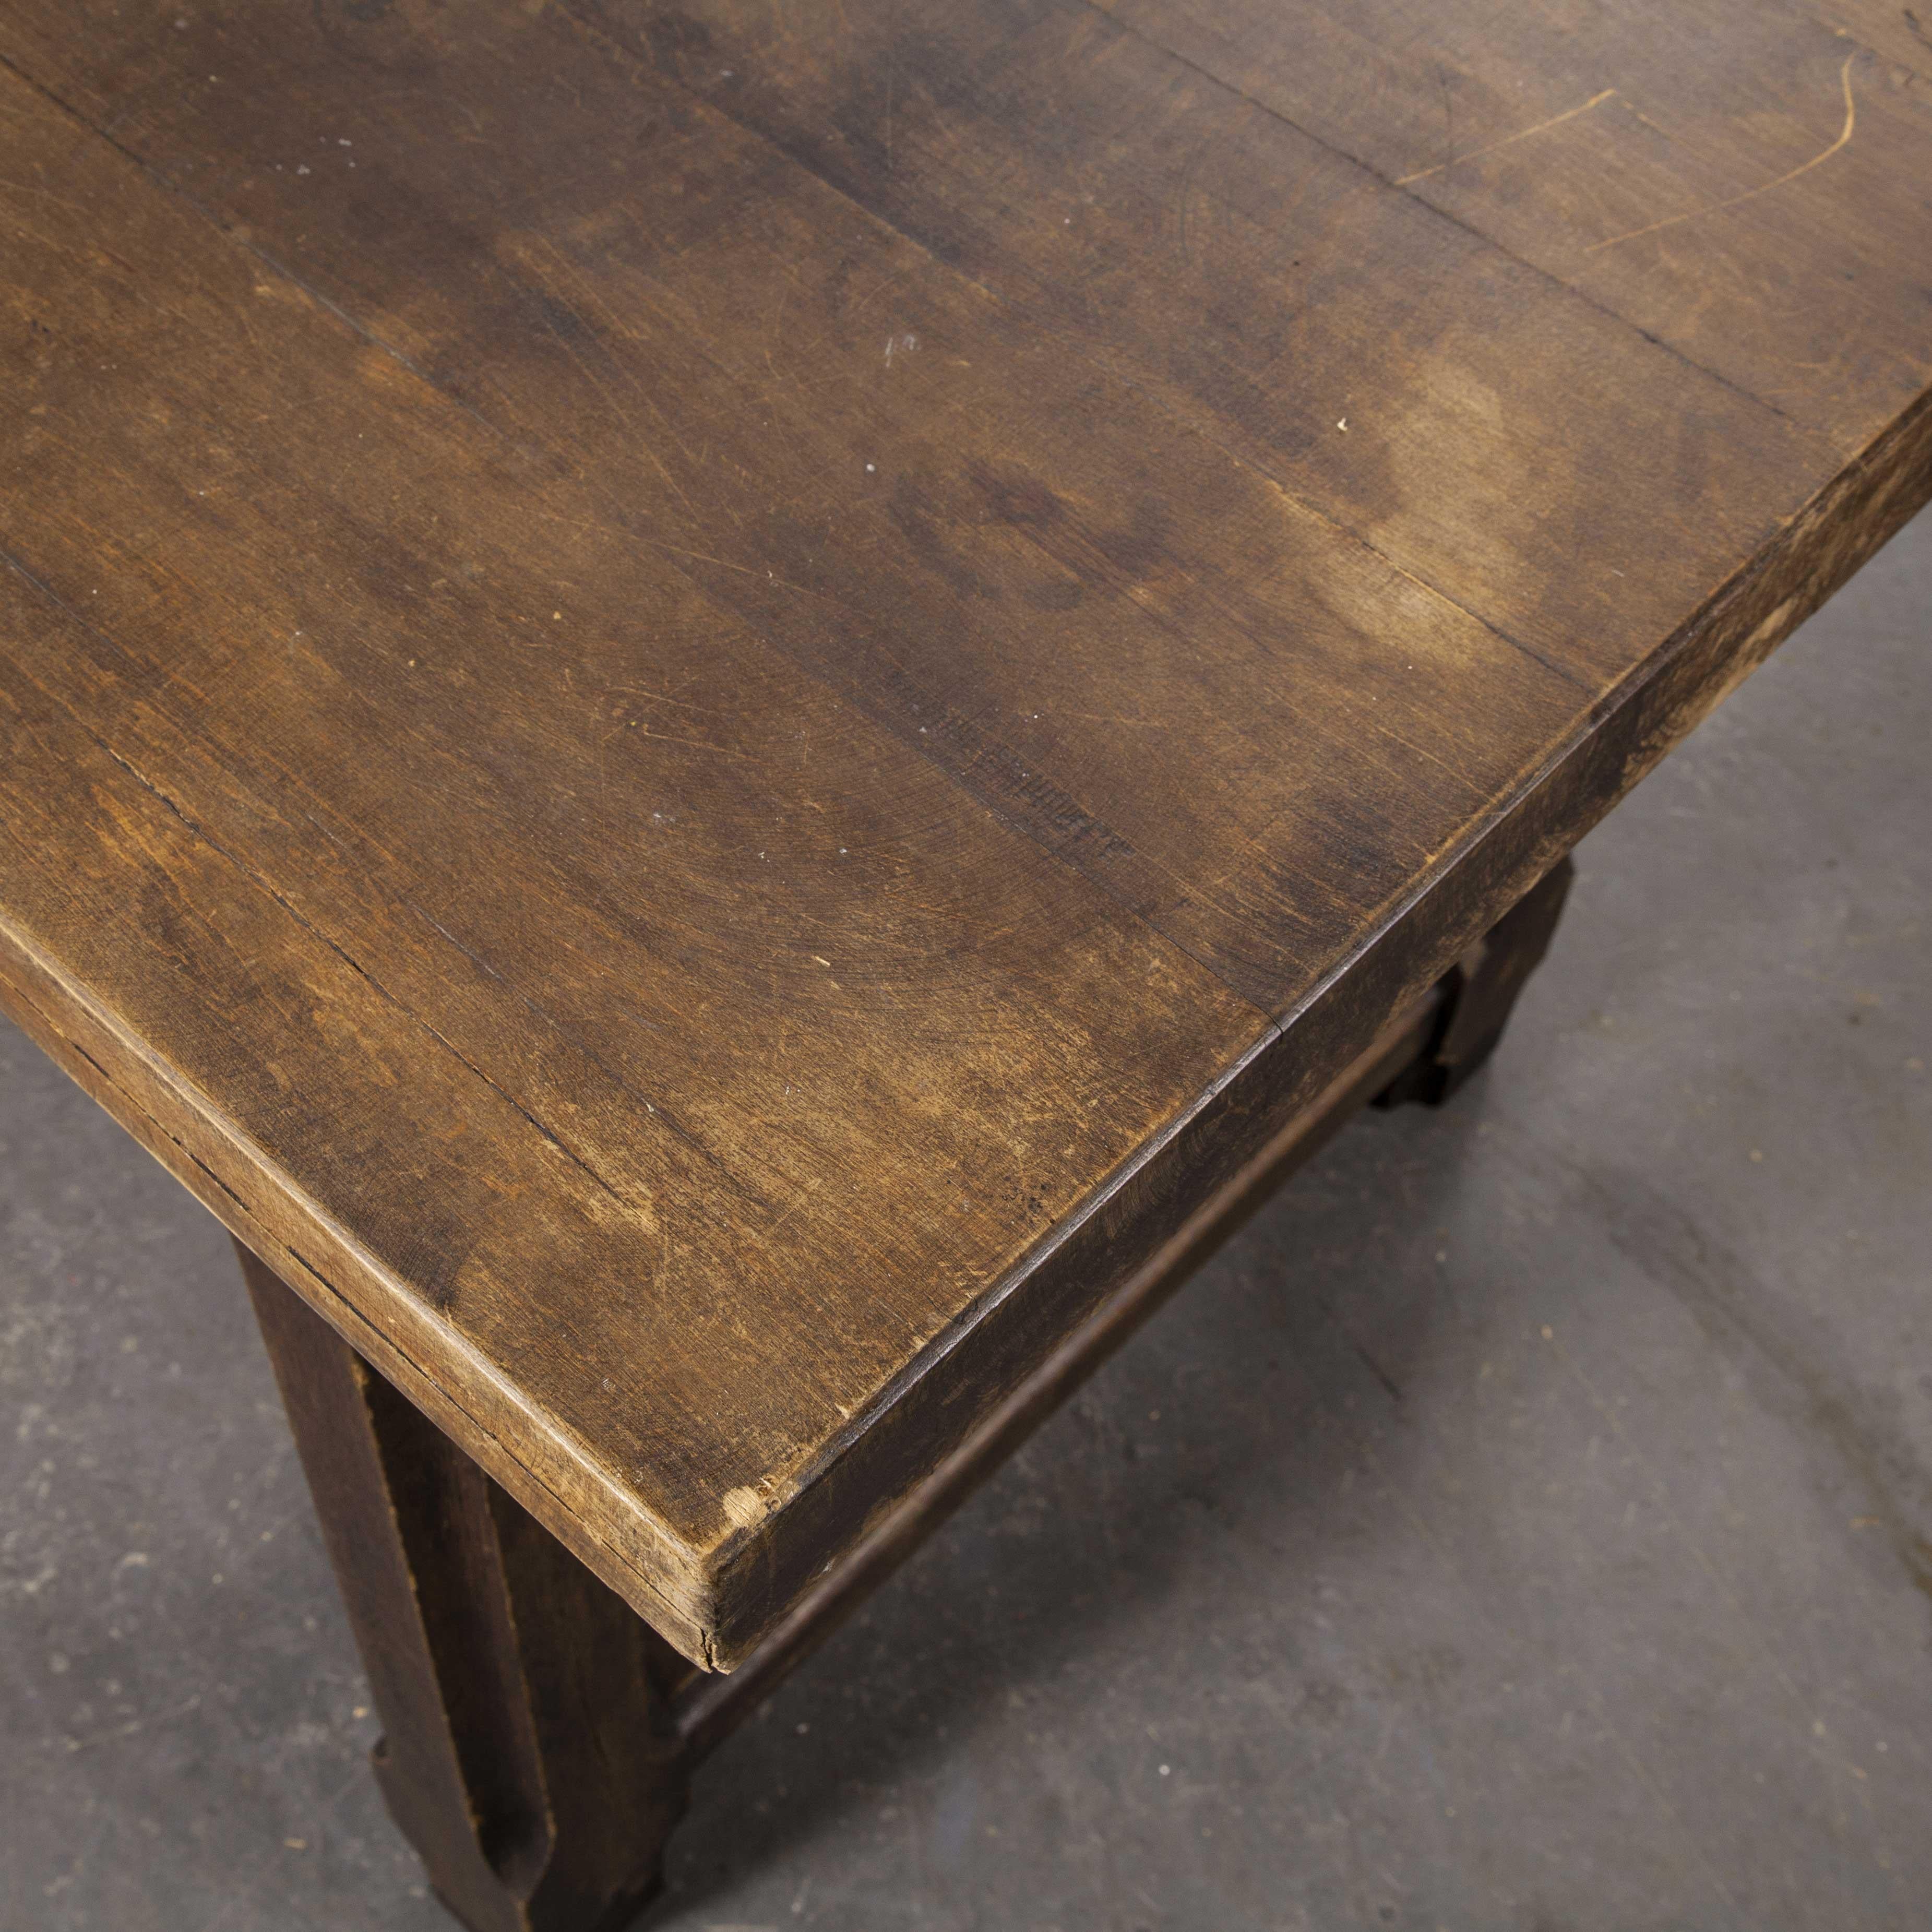 Long rectangular oak and birch French refectory dining table

Long rectangular oak and birch French refectory dining table. We know this was made in the 1940s because we bought it from the son whose father made the table just after the war. The